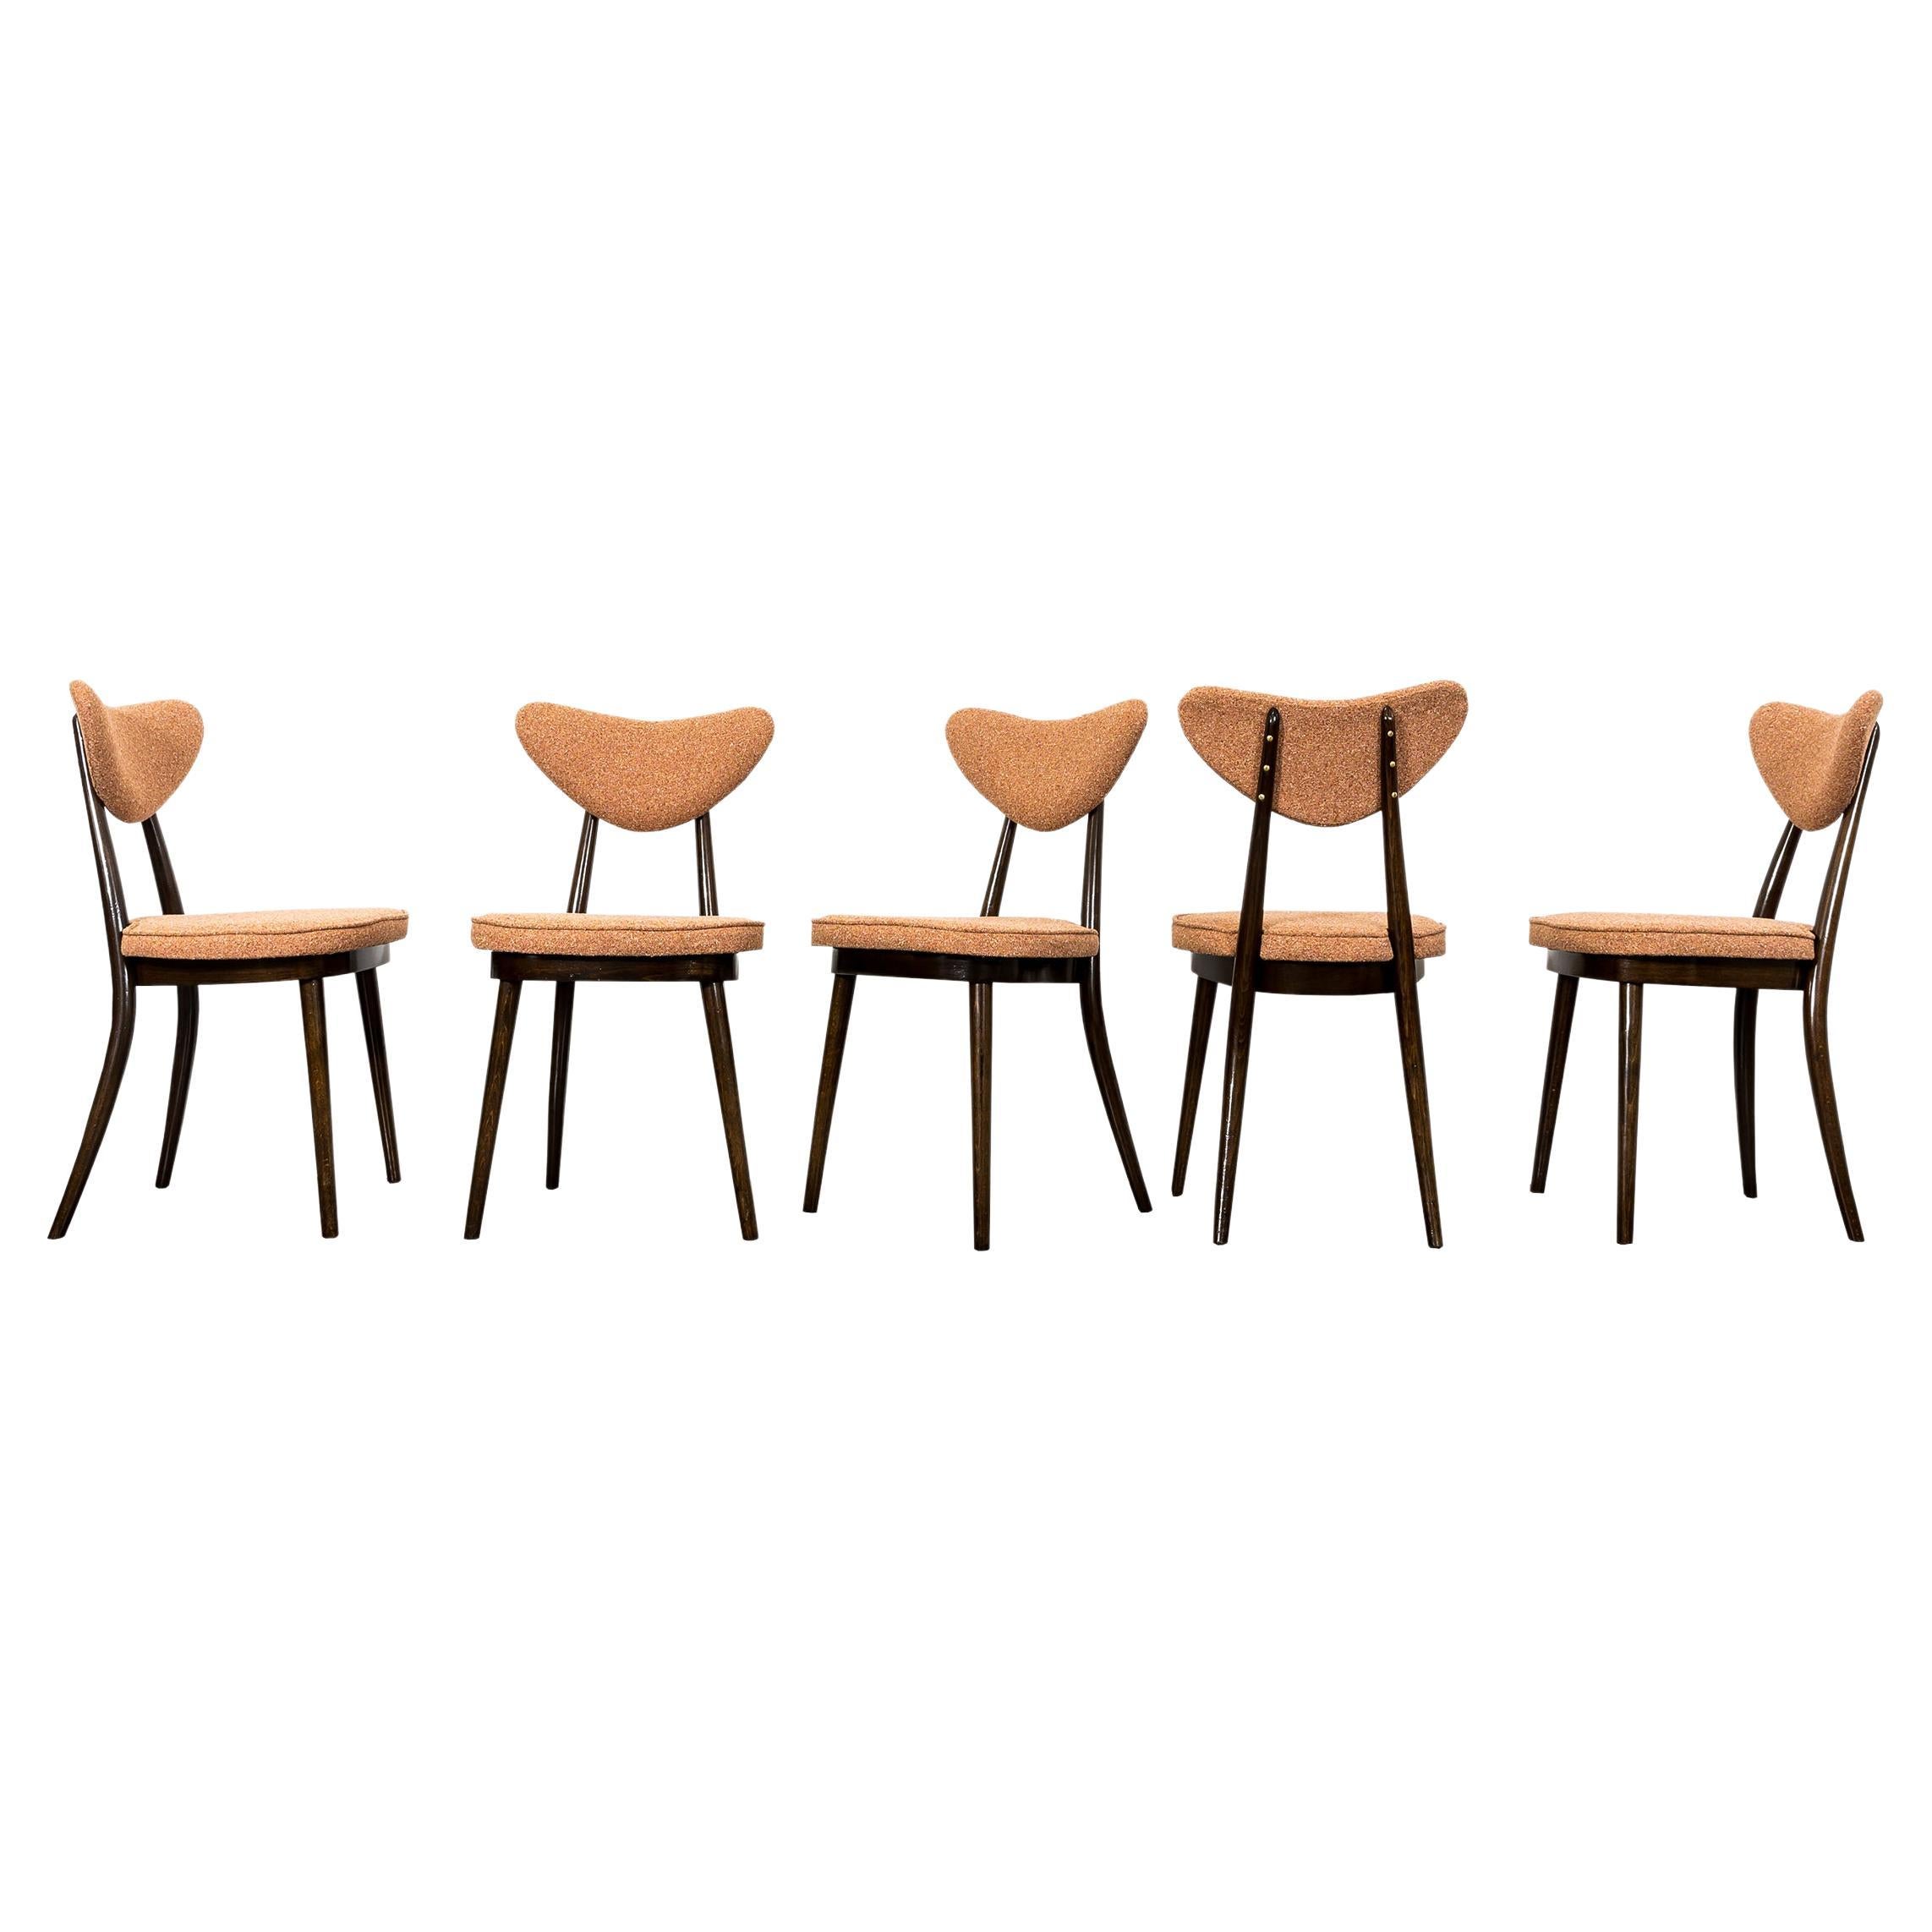 Set Of 5, Dining Chairs "Hearts" by H&J Kurmanowicz, 1950s, Poland For Sale